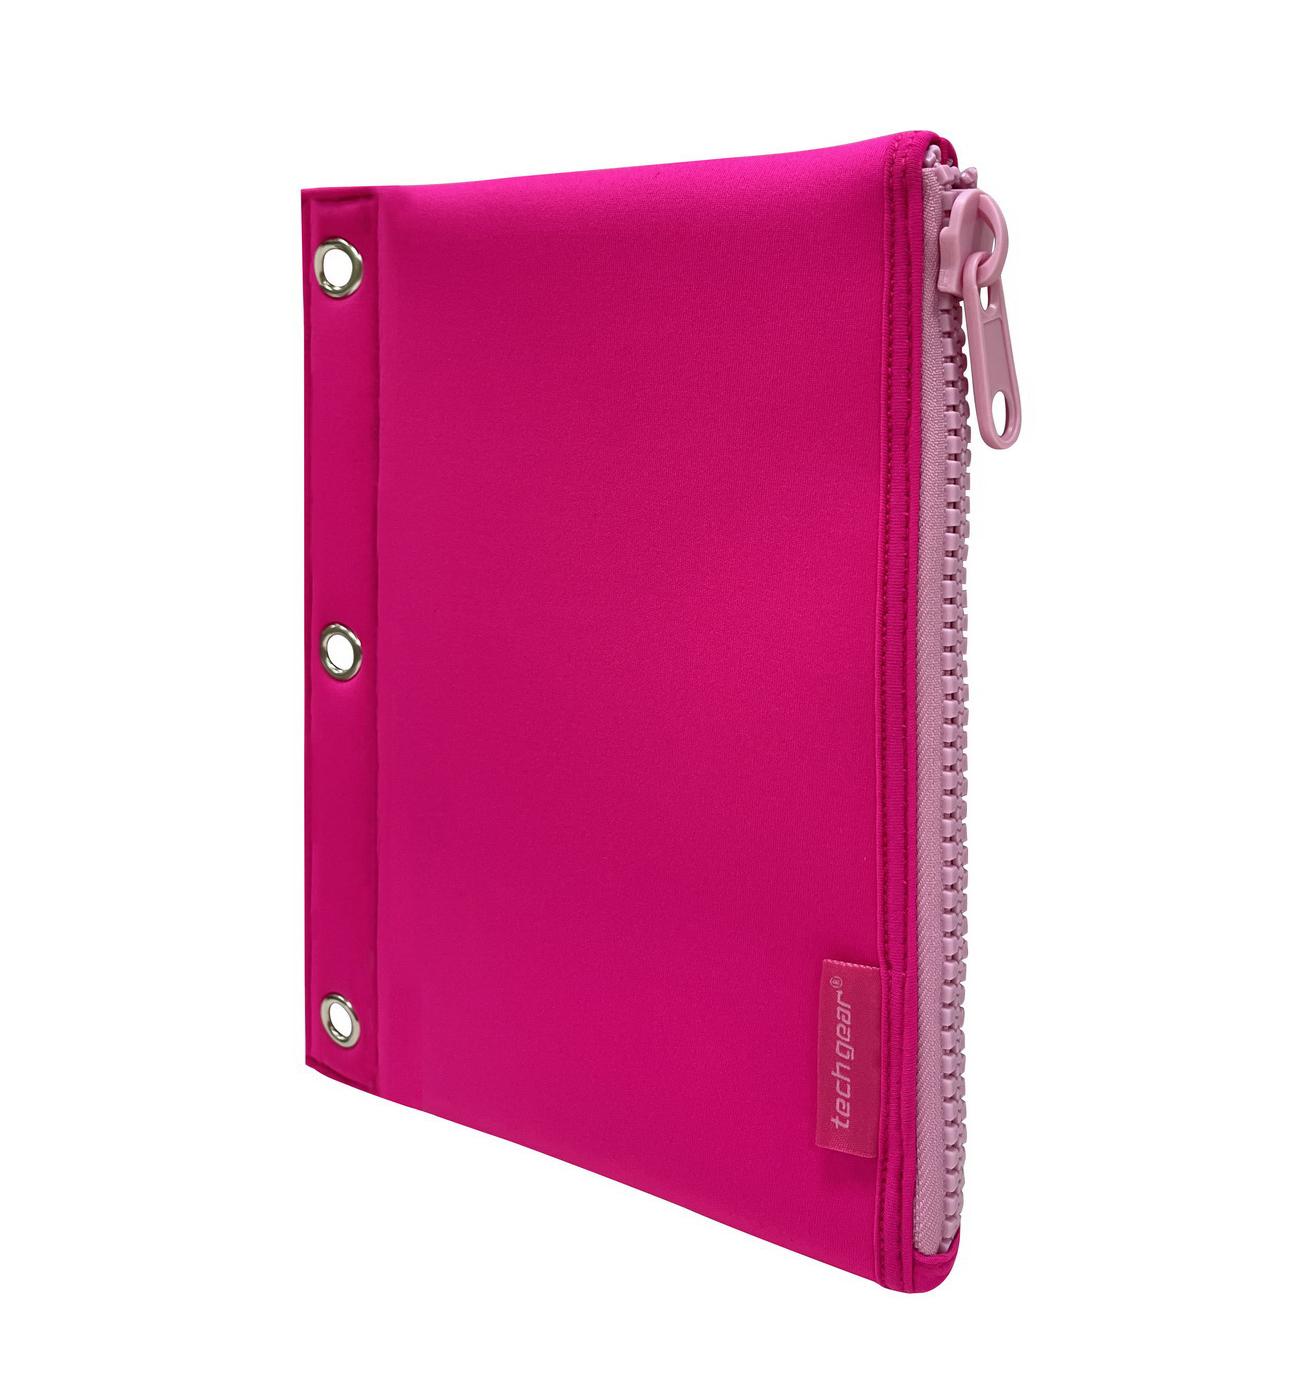 Tech Gear Neo XLZ Binder Pouch - Pink; image 2 of 2